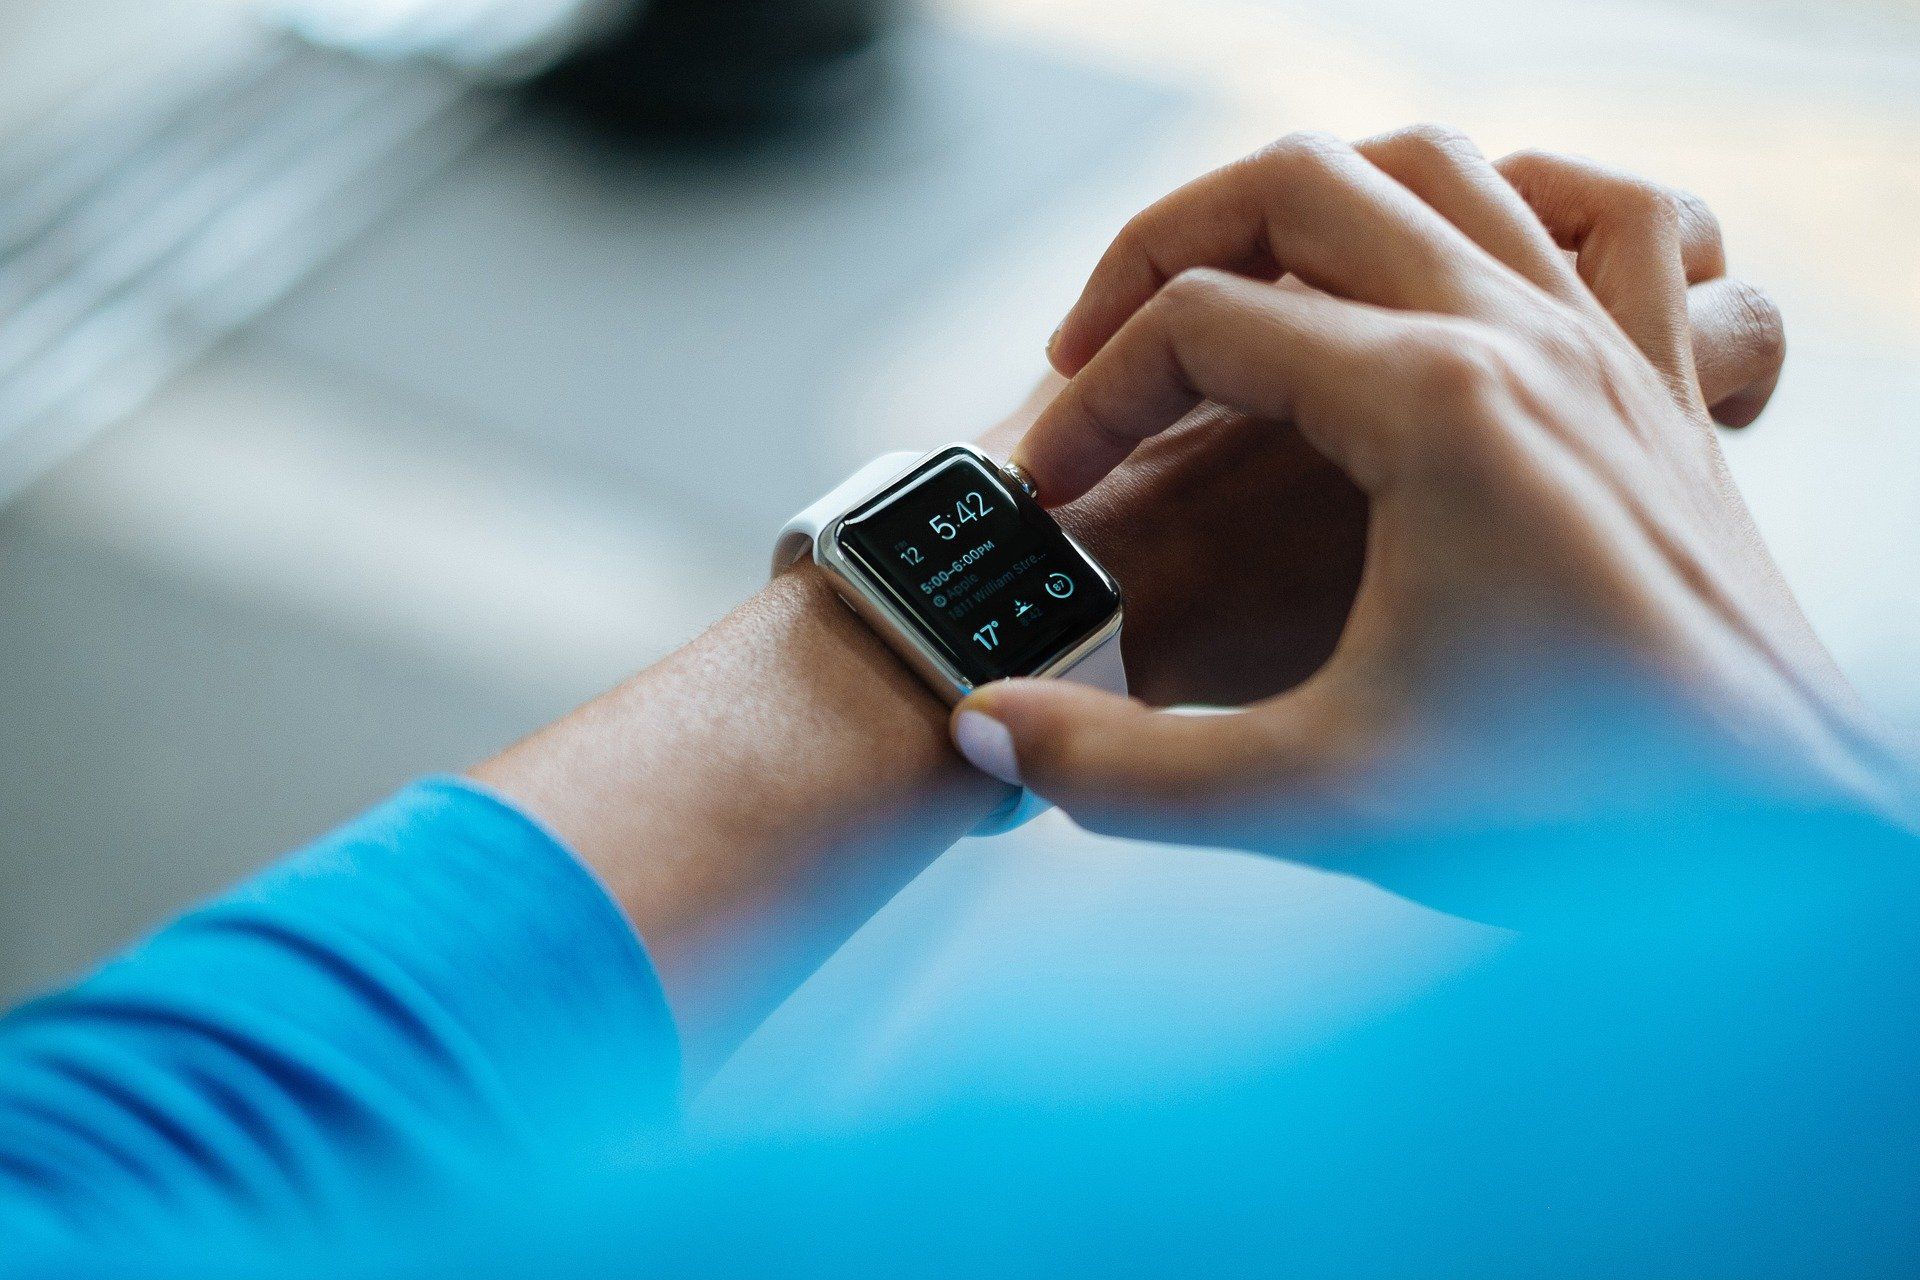 Five Steps to Protect your Privacy on Wearable Devices